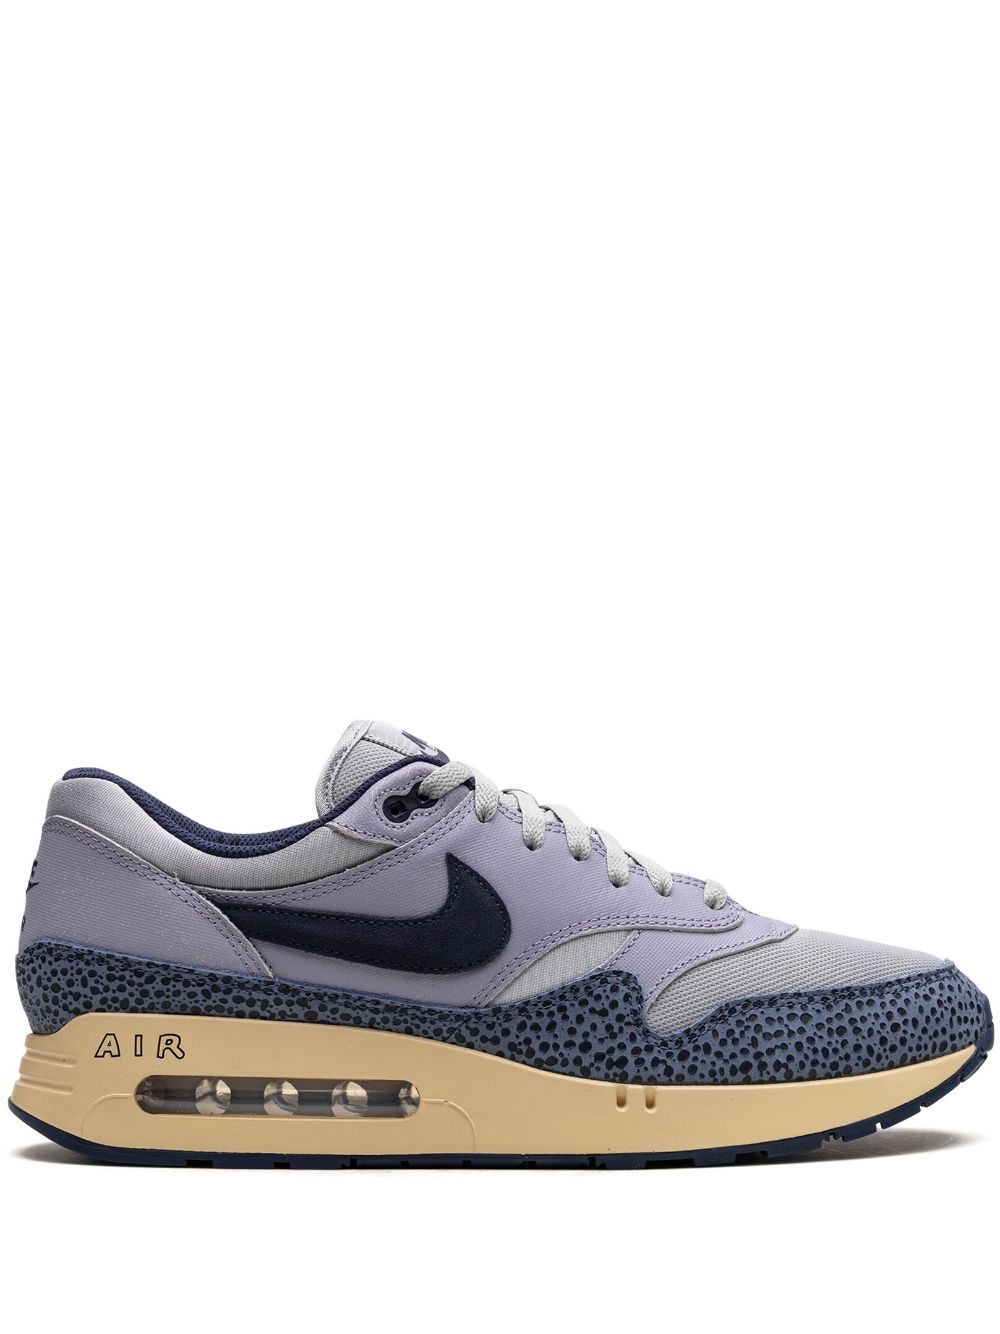 Shop Nike Air Max 1 '86 Og Big Bubble Lost Sketch In Blue